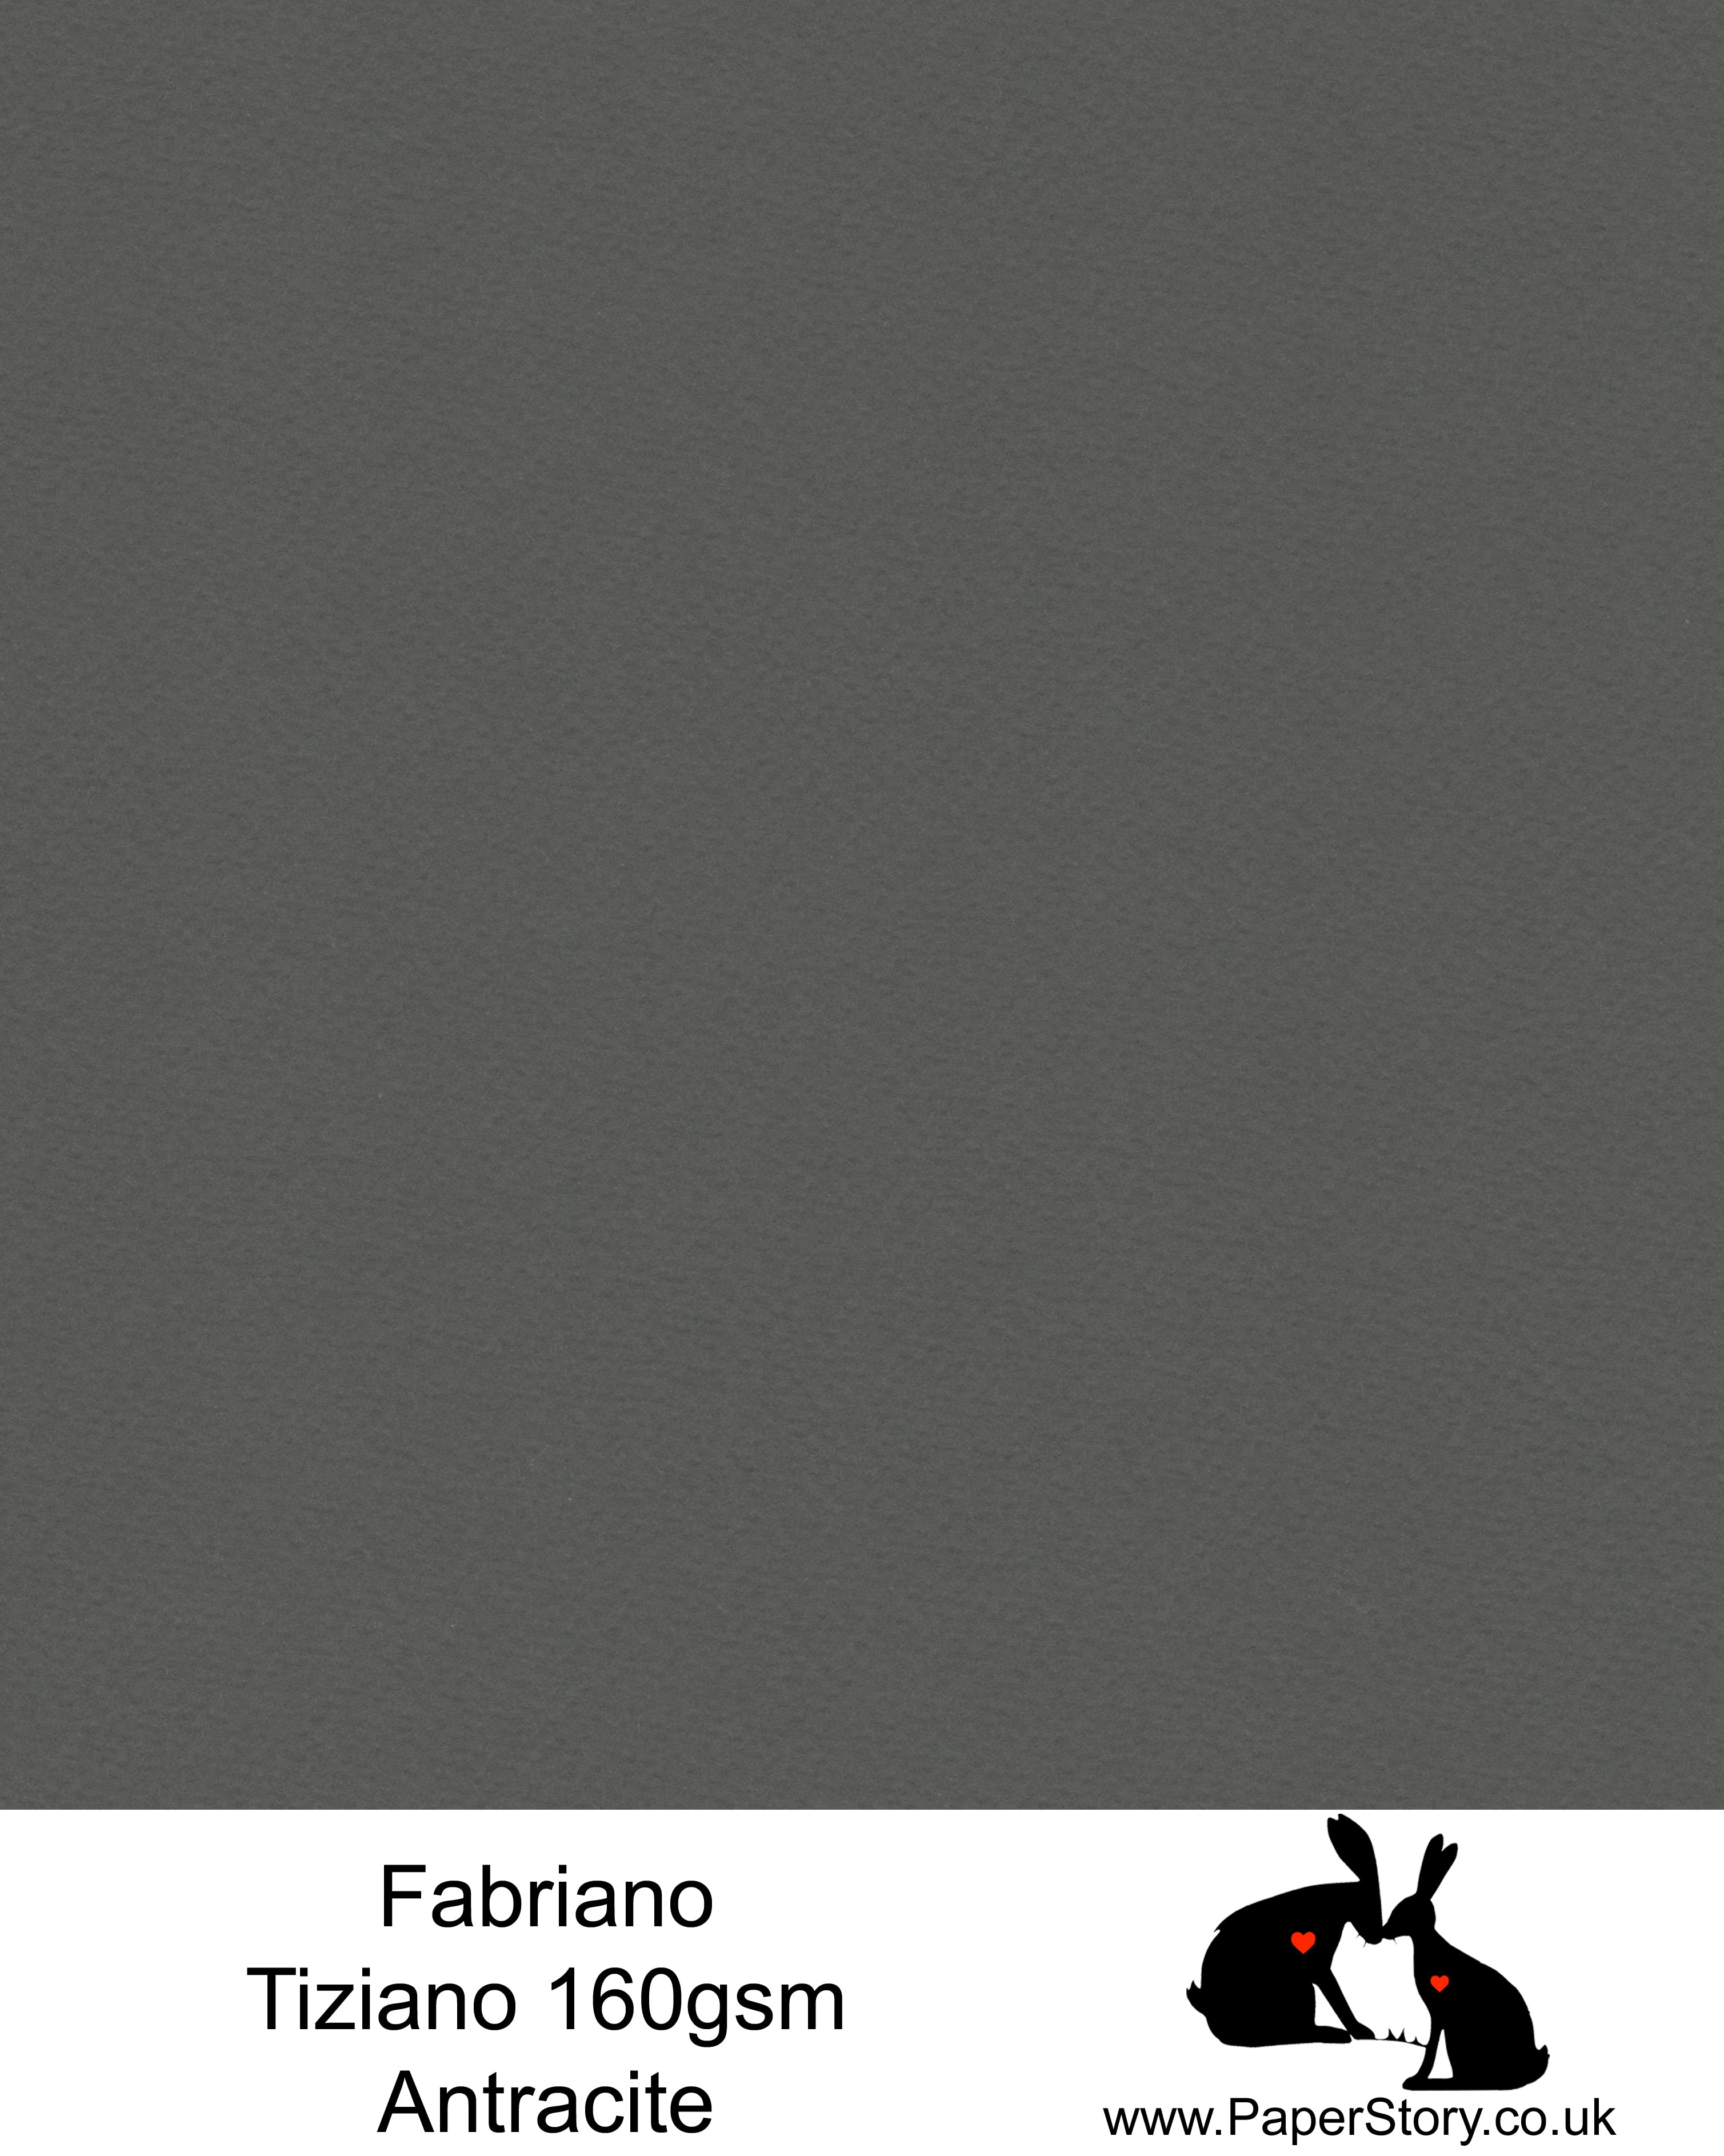 High quality paper from Italy, Antracite, charcoal dark grey. Tiziano is 160 gsm, Tiziano has a high cotton content, a textured naturally sized surface. This paper is acid free to guarantee long permanence in time, pH neutral. It has highly lightfast colours, an excellent surface making and sizing which make this paper particularly suitable for papercutting, pastels, pencil, graphite, charcoal, tempera, air brush and watercolour techniques. Tiziano can be used for all printing techniques.